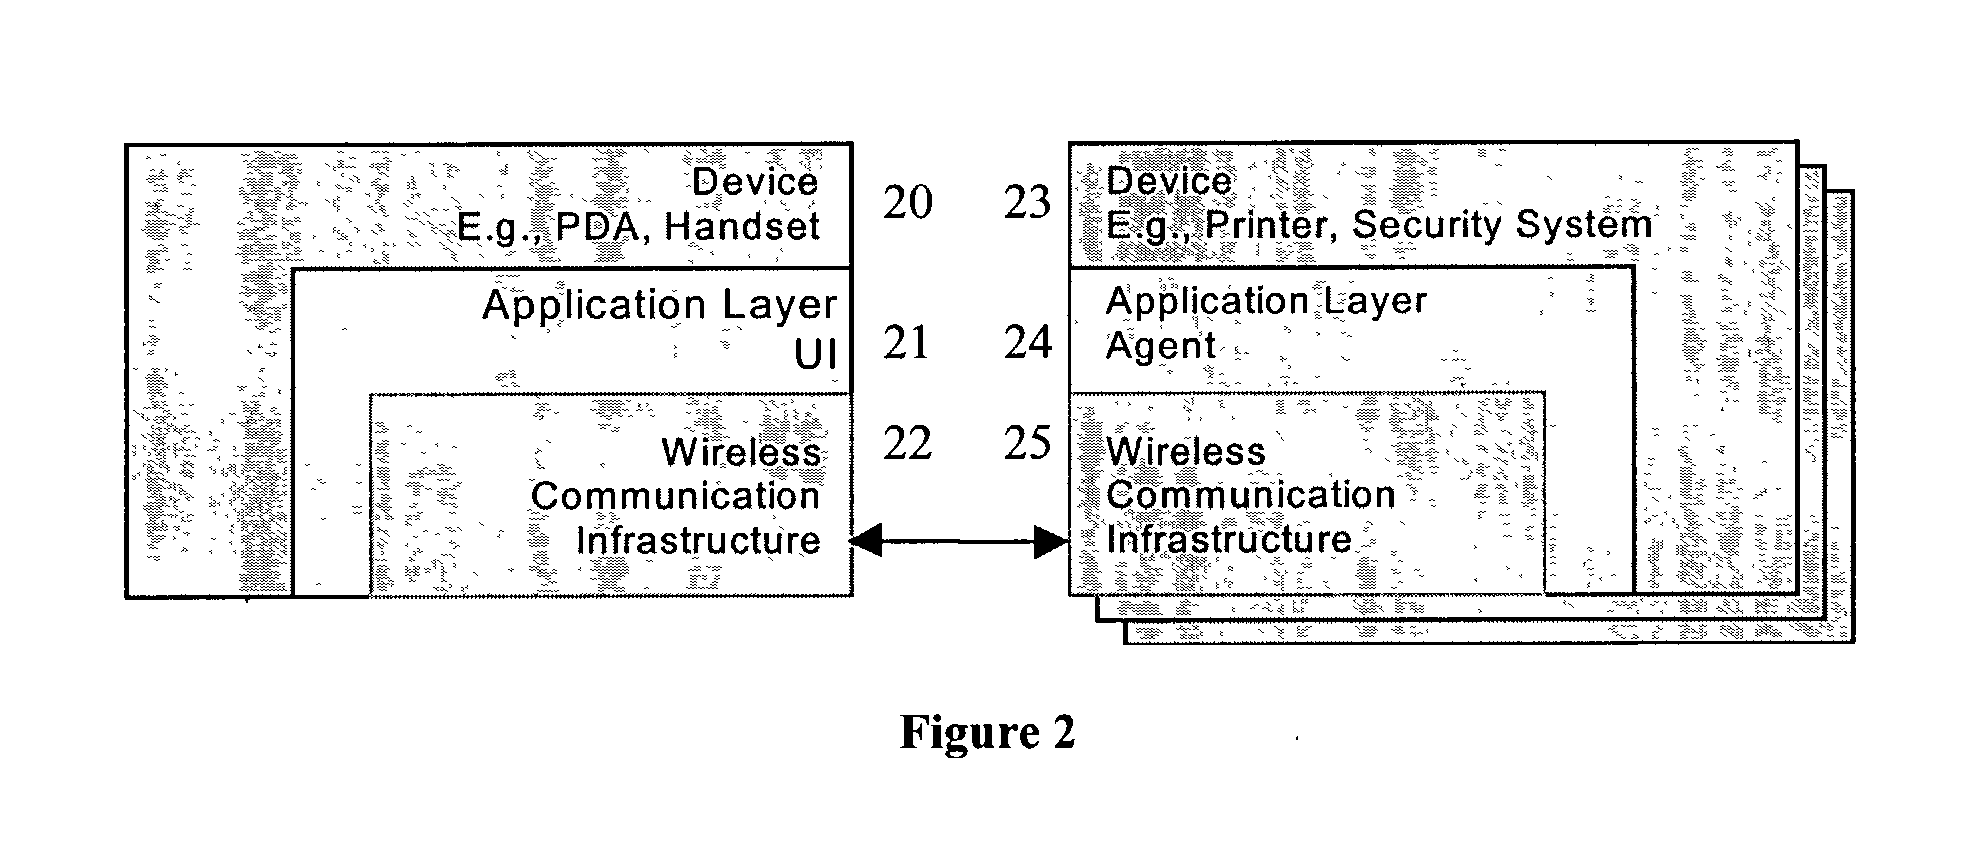 Method and apparatus for universal device management